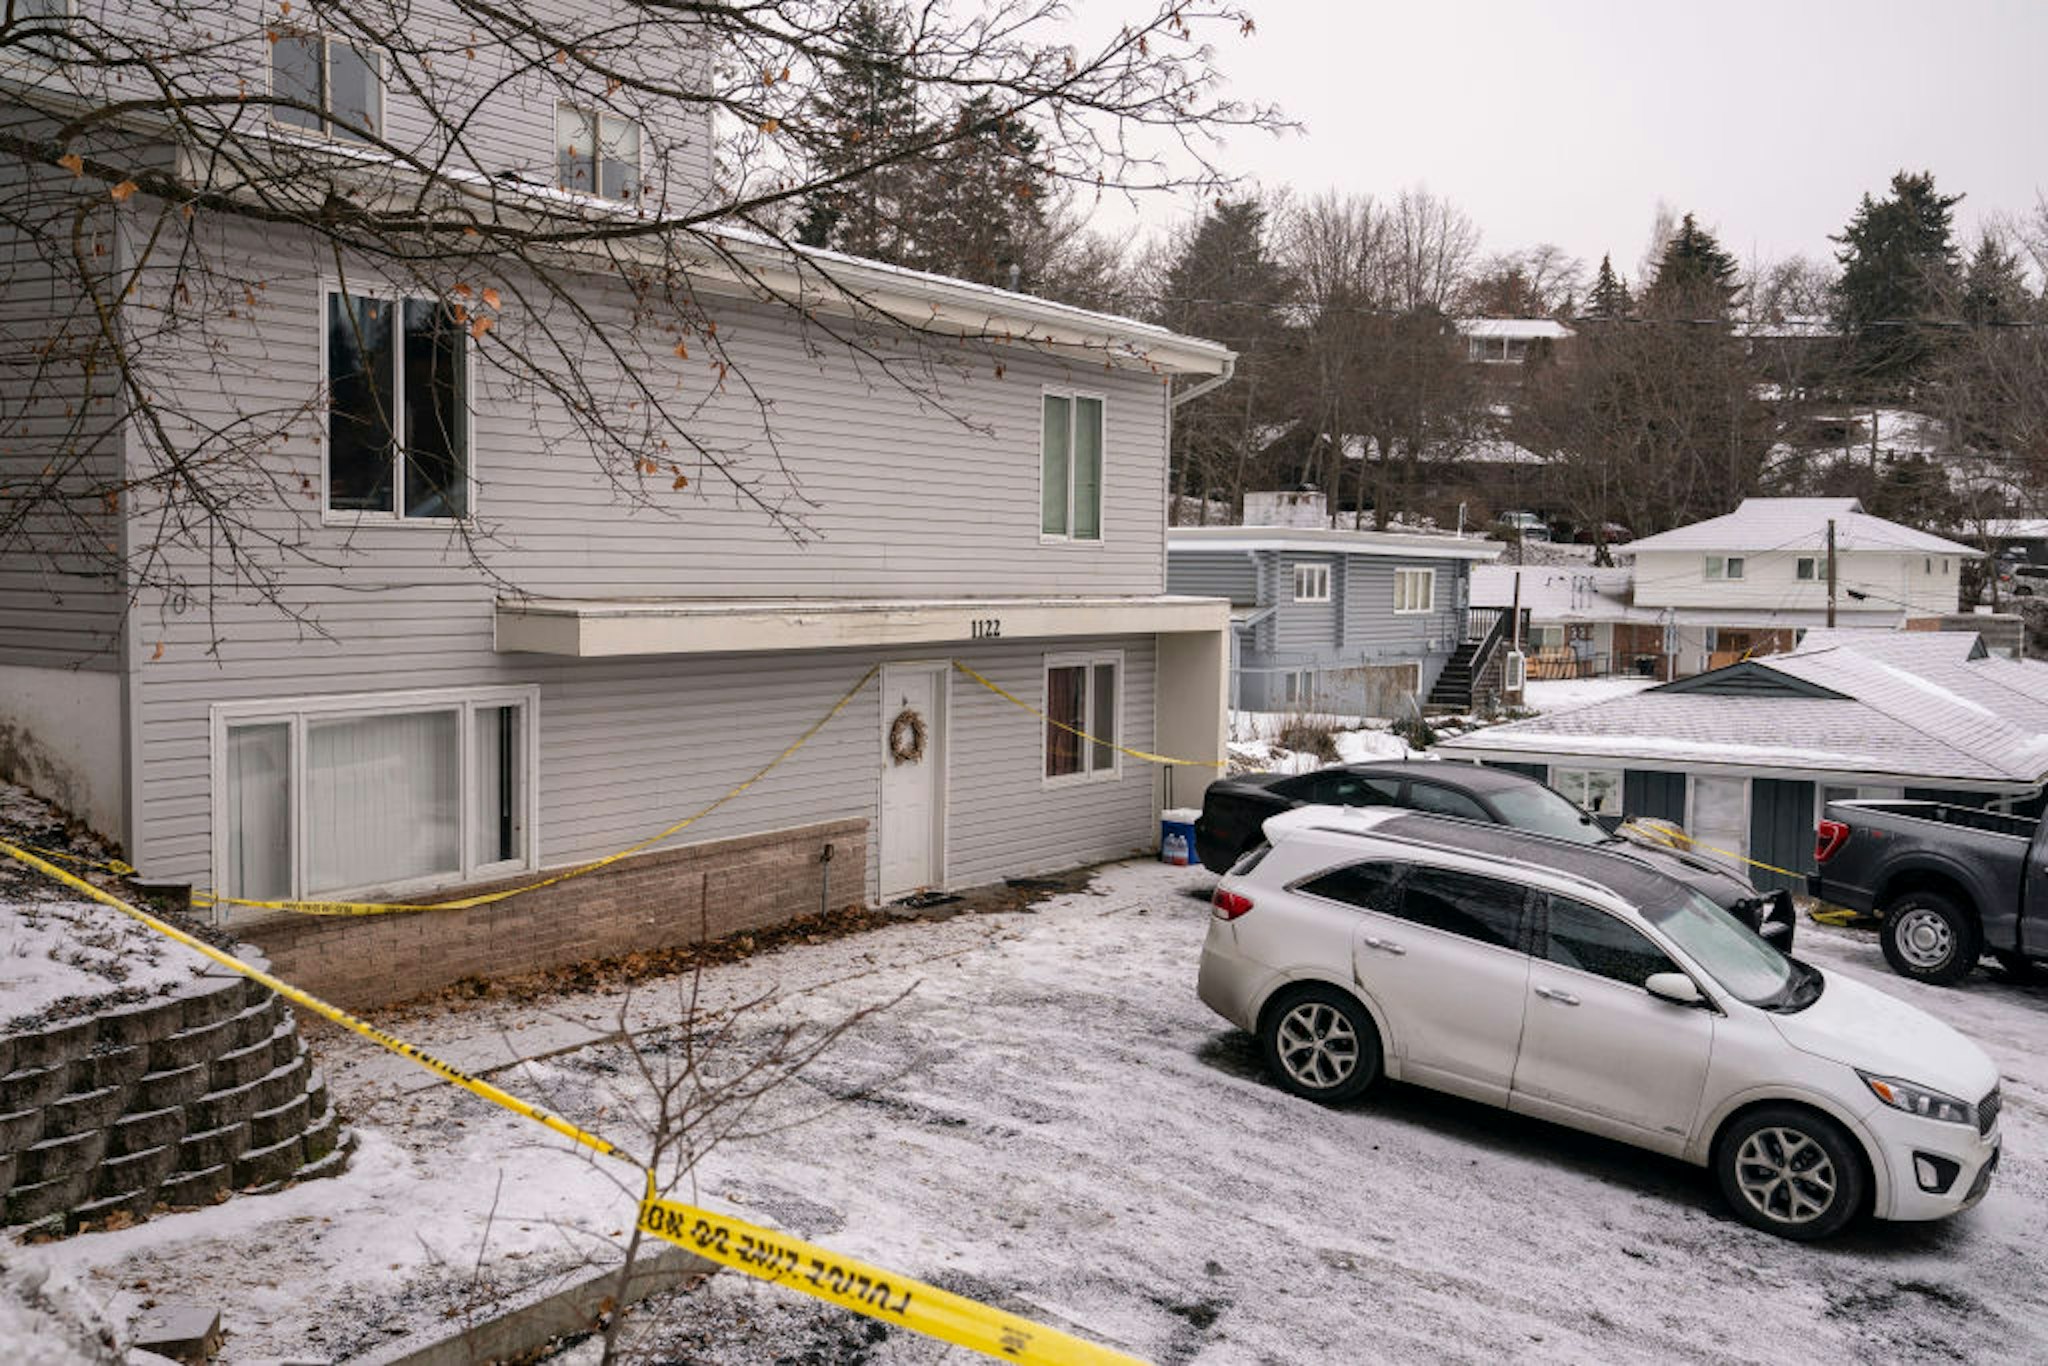 Police tape surrounds a home that is the site of a quadruple murder on January 3, 2023 in Moscow, Idaho.